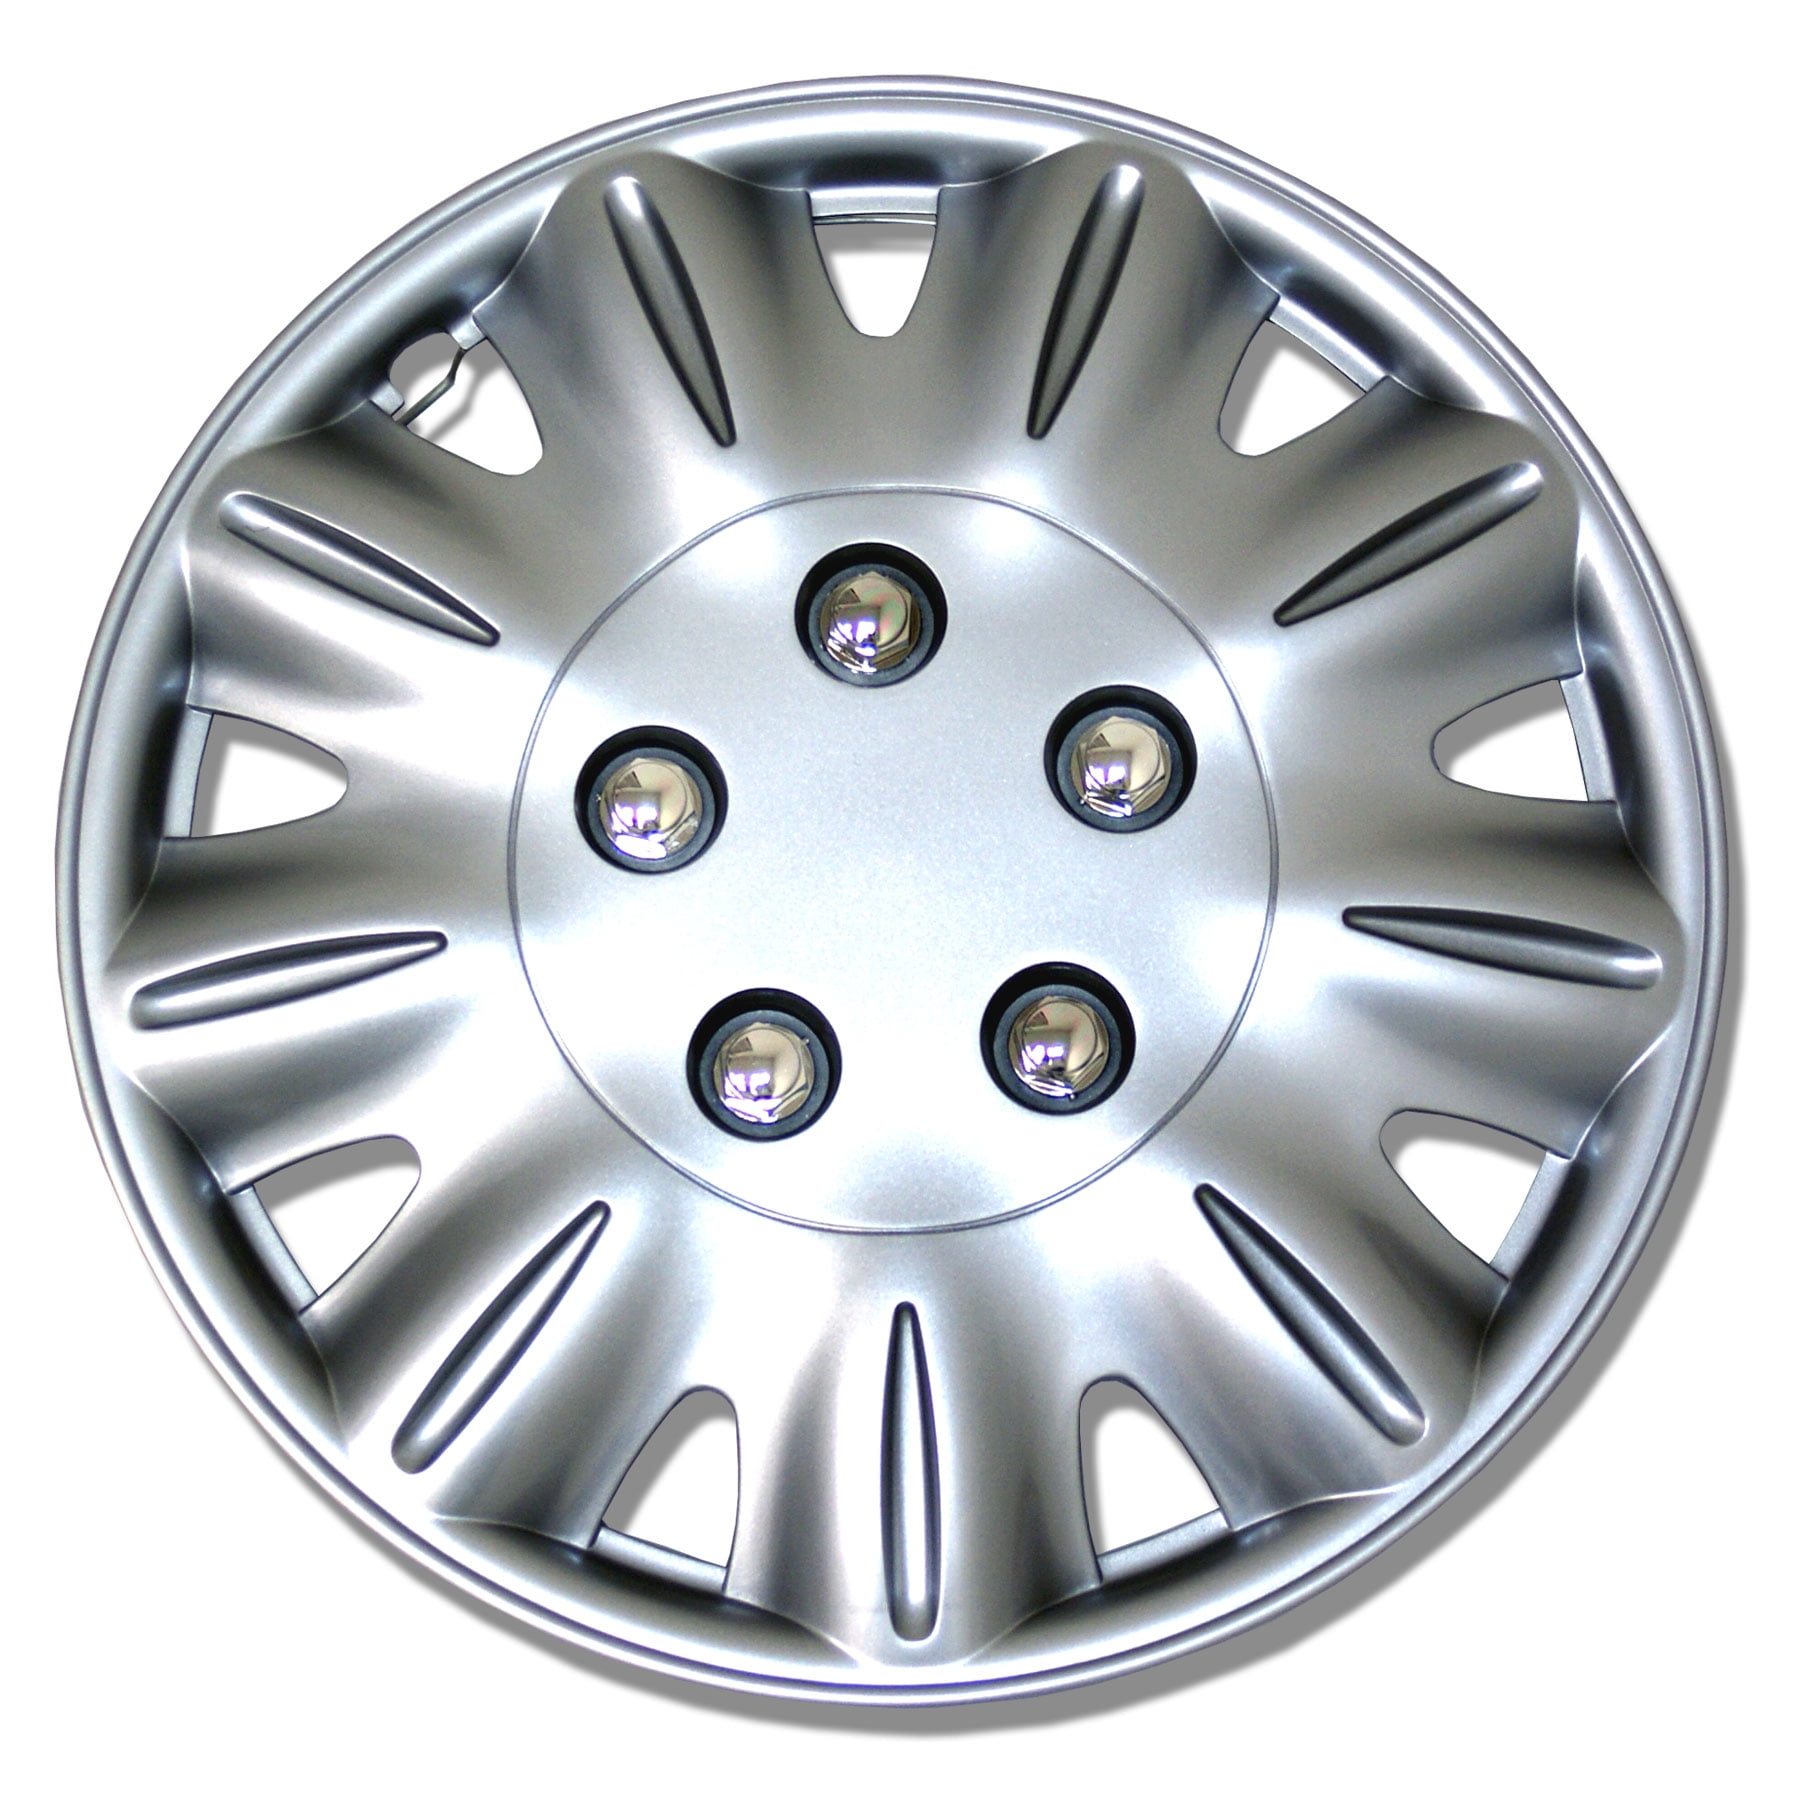 TuningPros WSC-029S15 Hubcaps Wheel Skin Cover 15-Inches Silver Set of 4